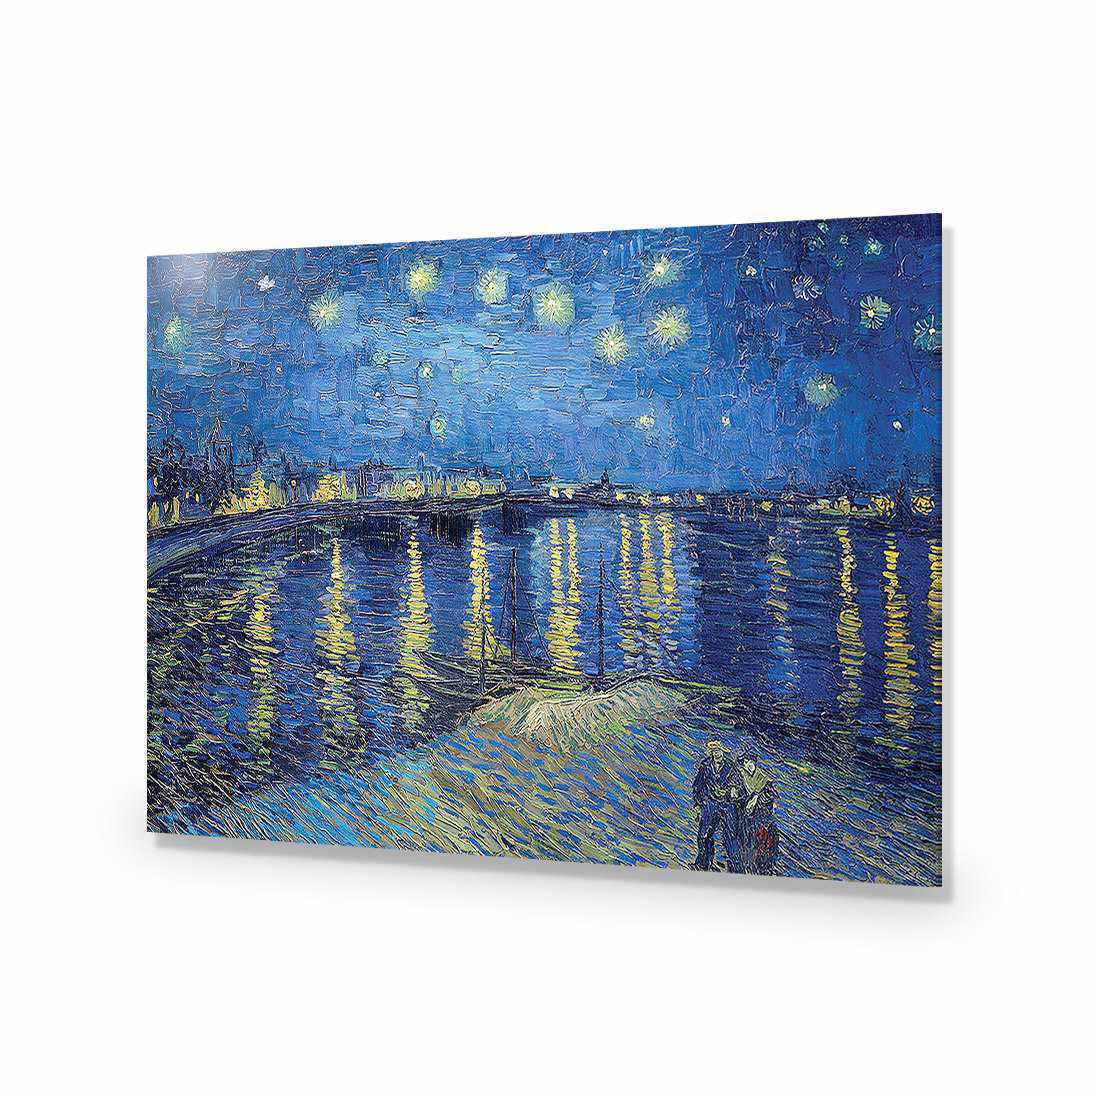 Starry Night Over the Rhone - Van Gogh-Acrylic-Wall Art Design-Without Border-Acrylic - No Frame-45x30cm-Wall Art Designs